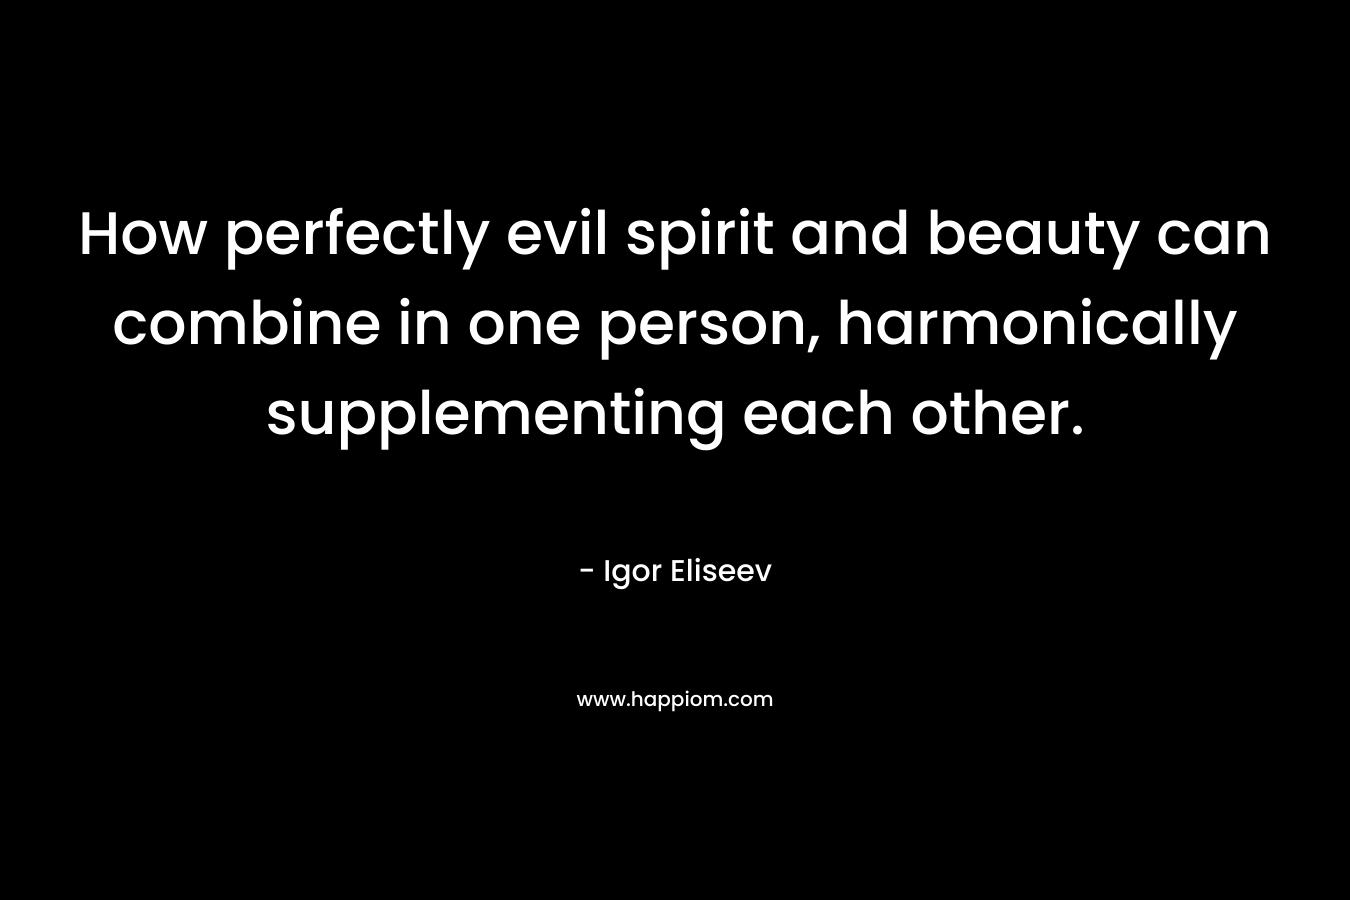 How perfectly evil spirit and beauty can combine in one person, harmonically supplementing each other. – Igor Eliseev